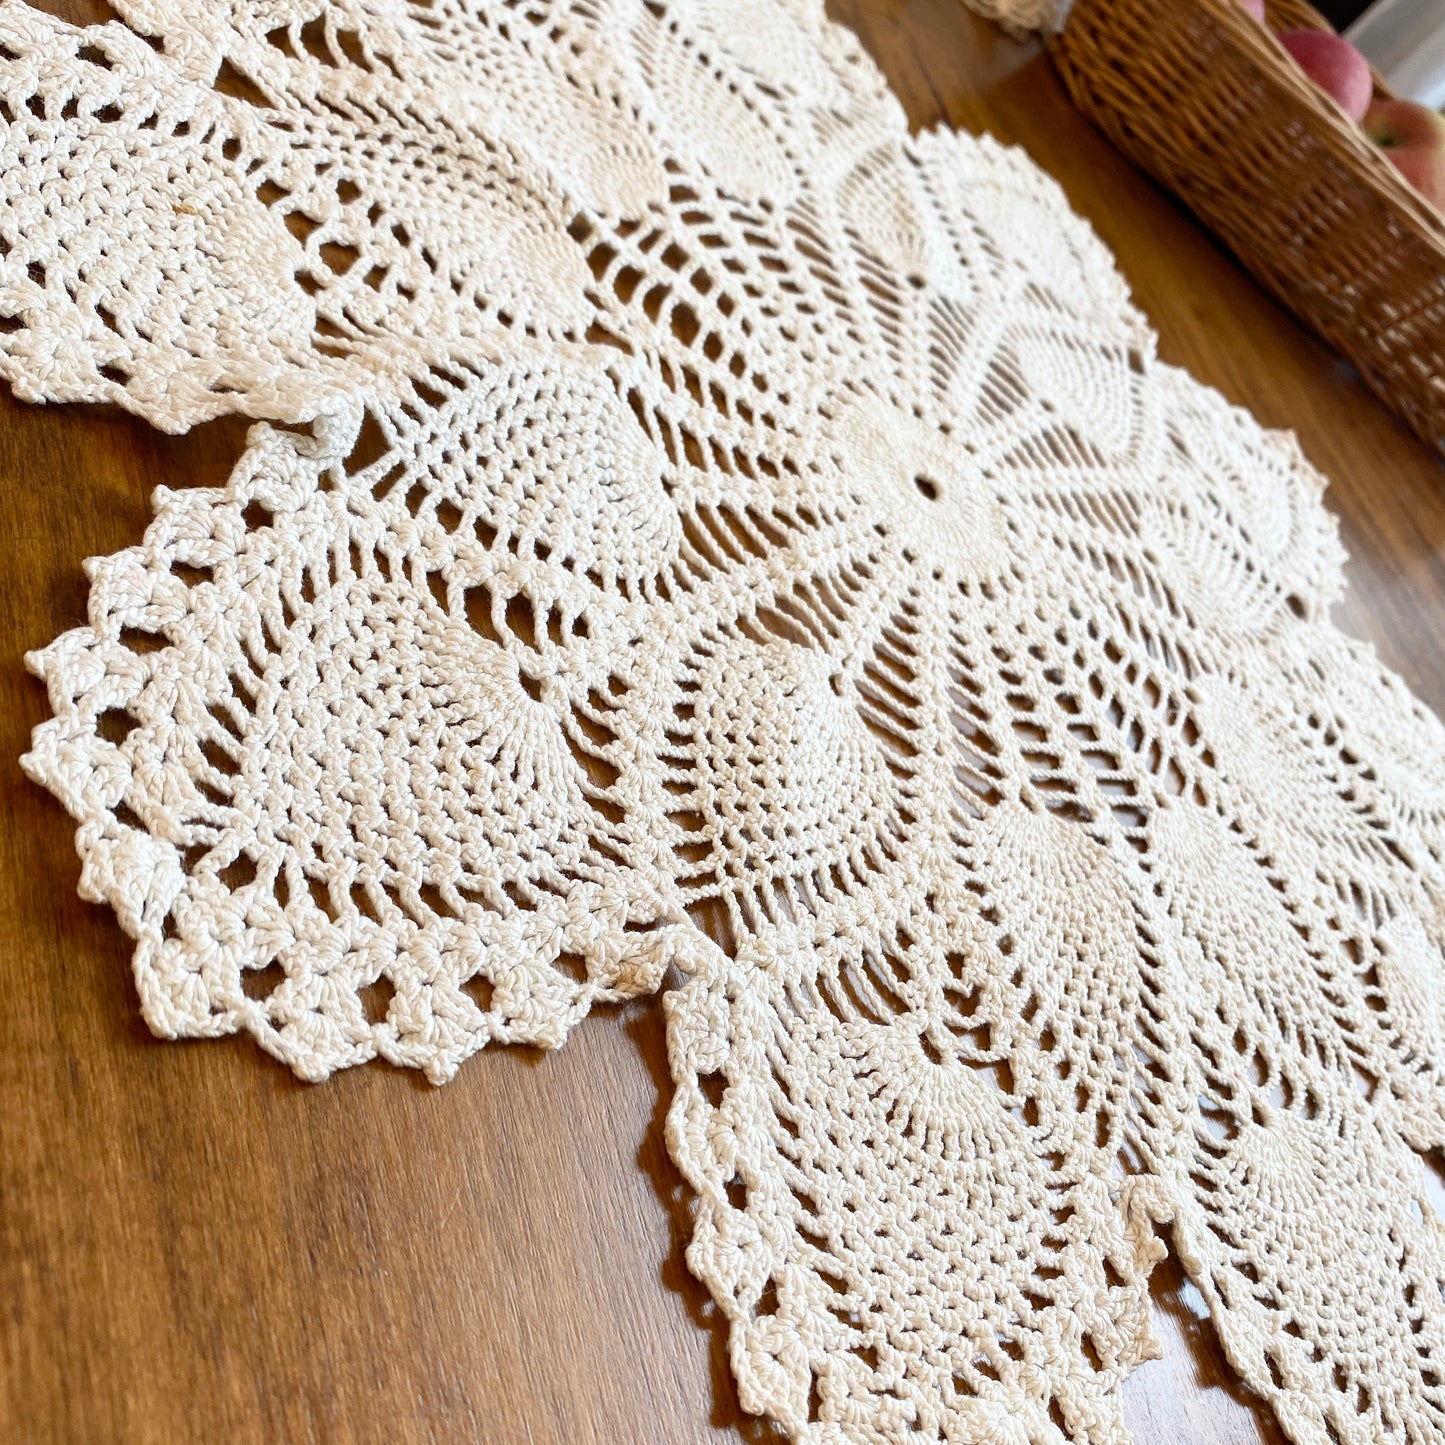 Large Crocheted Doily